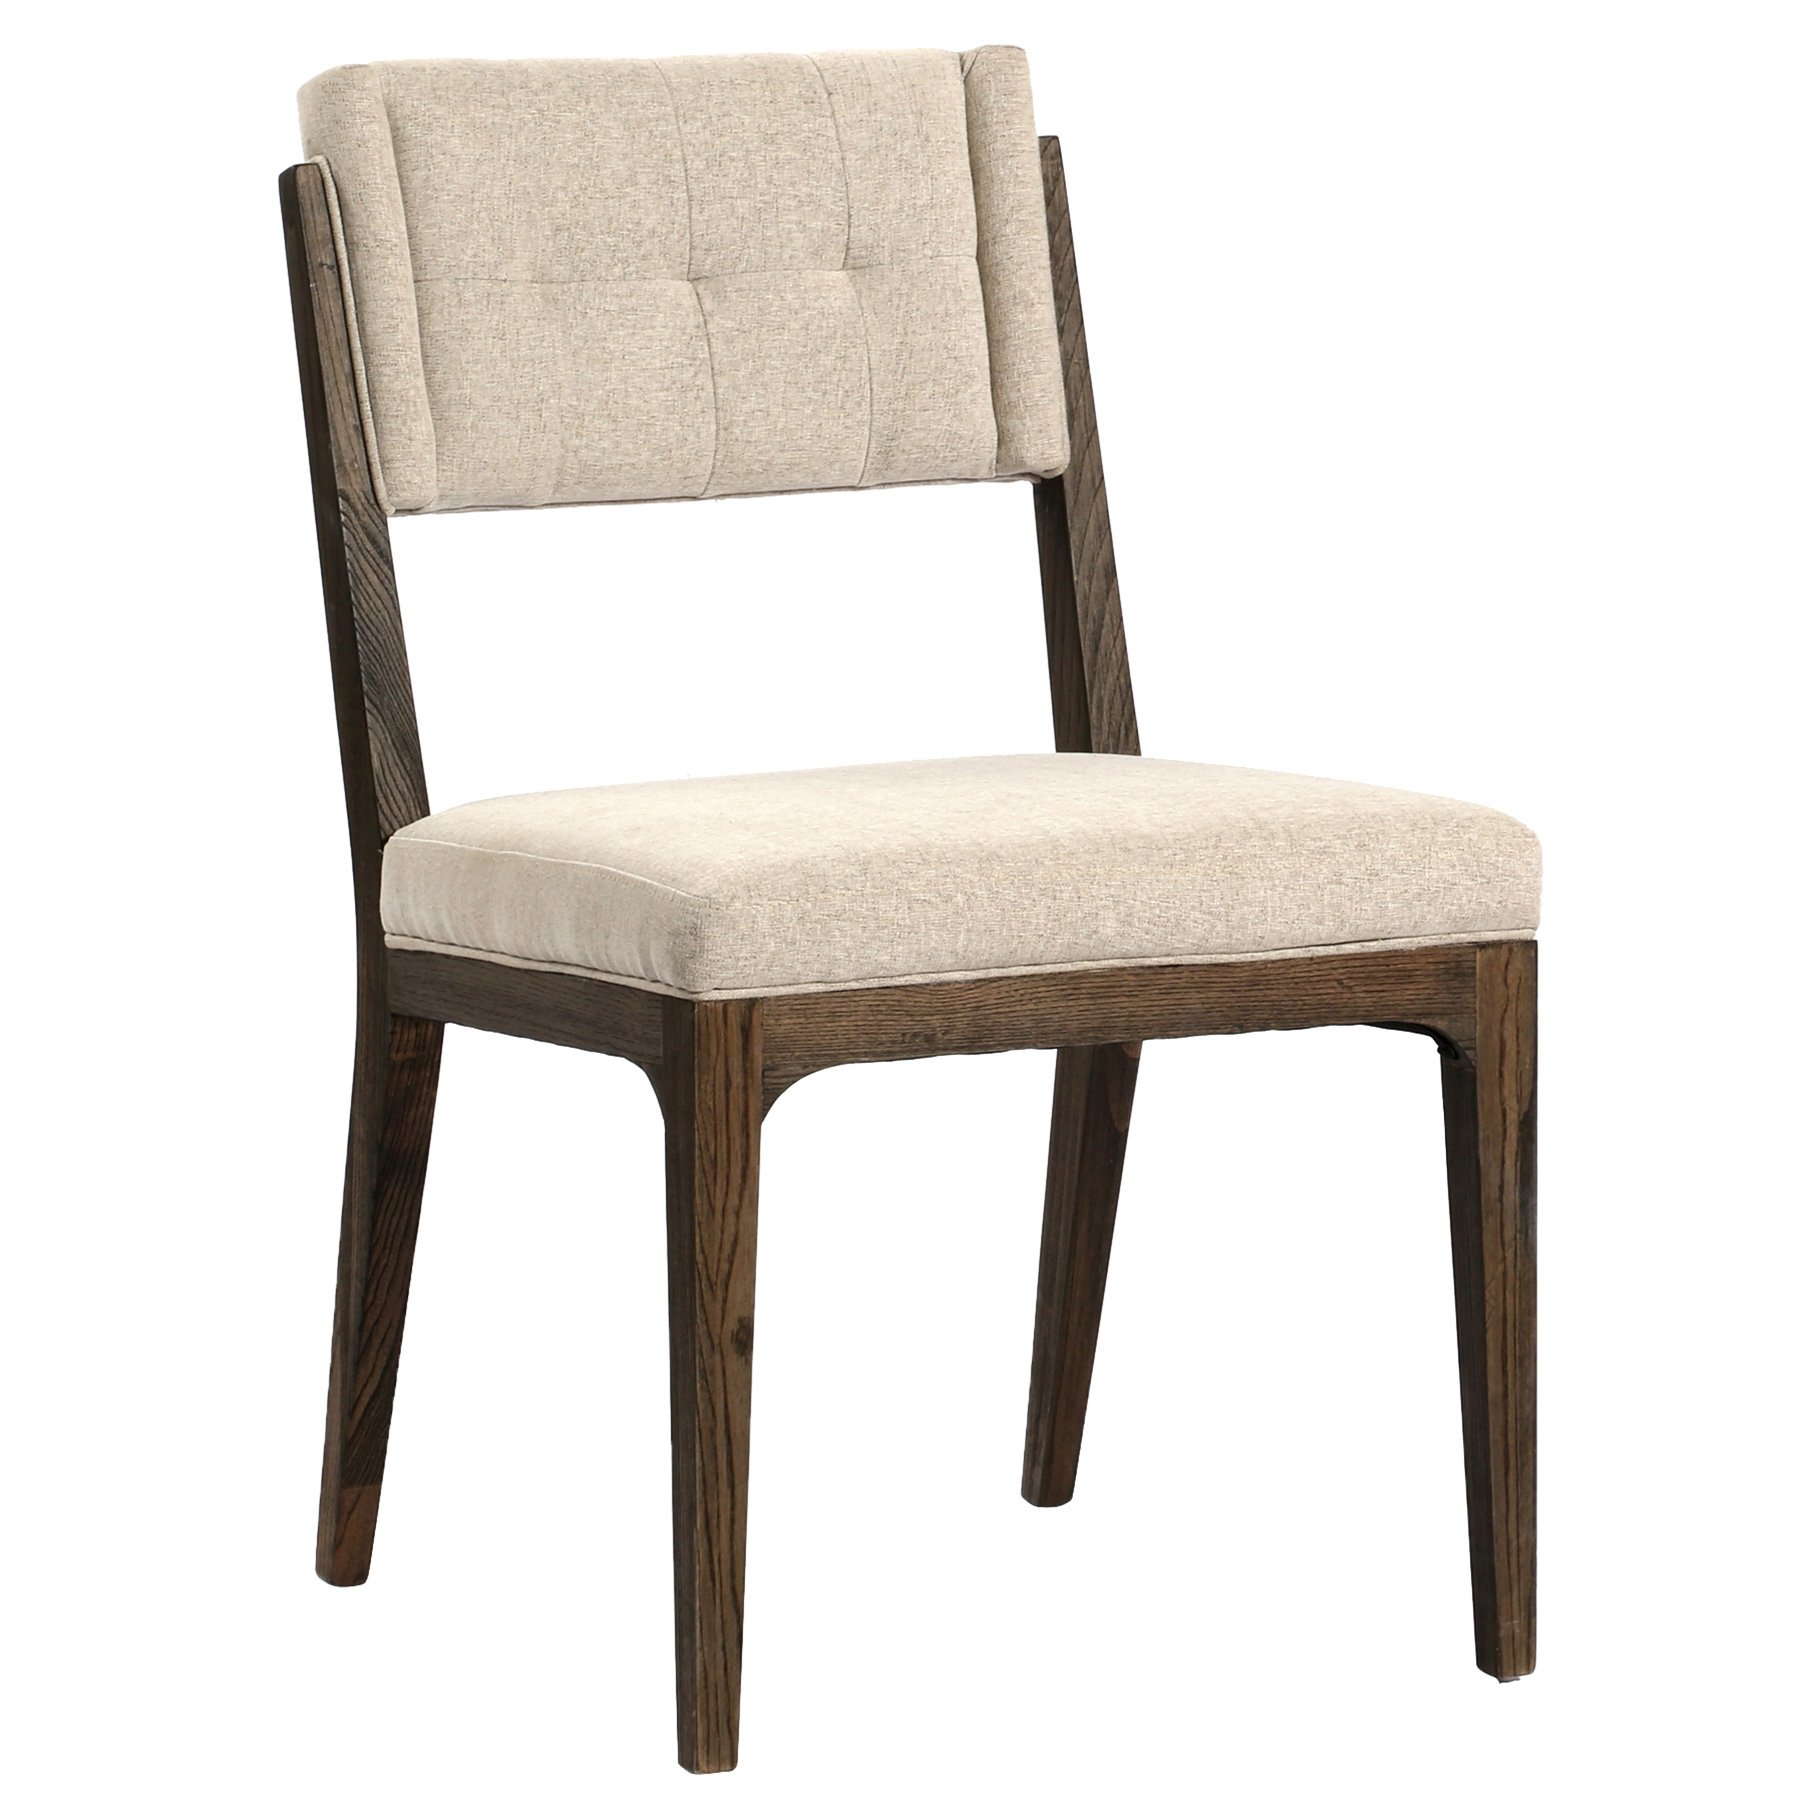 Arlene French Country Tuffed Beige Linen Upholstered Wood Dining Chair - Image 0